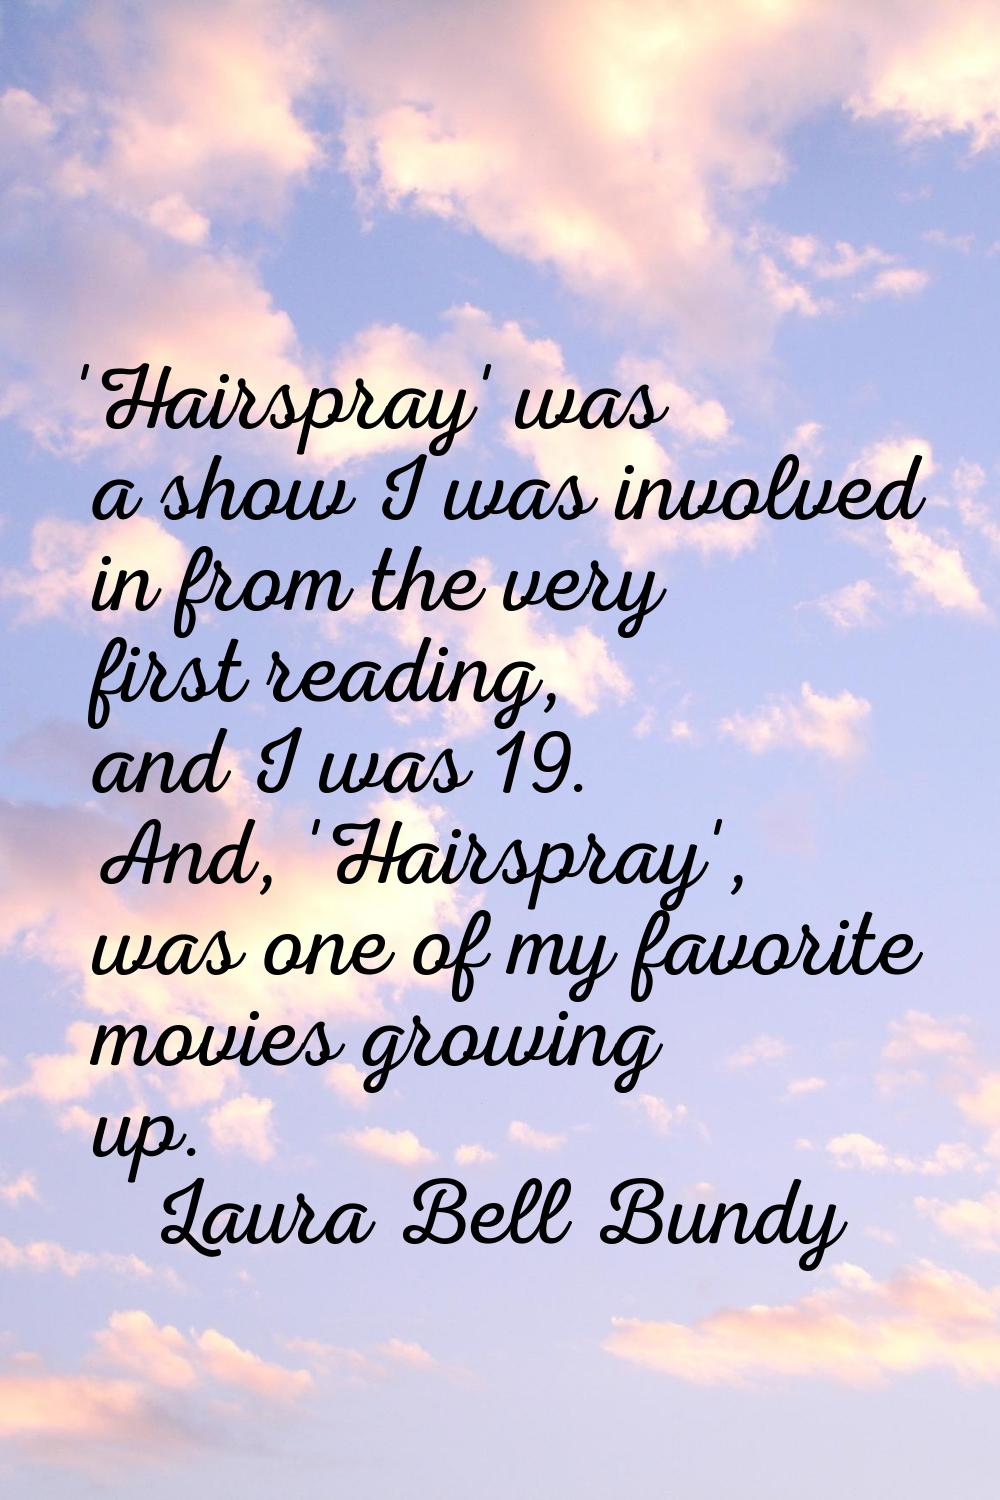 'Hairspray' was a show I was involved in from the very first reading, and I was 19. And, 'Hairspray